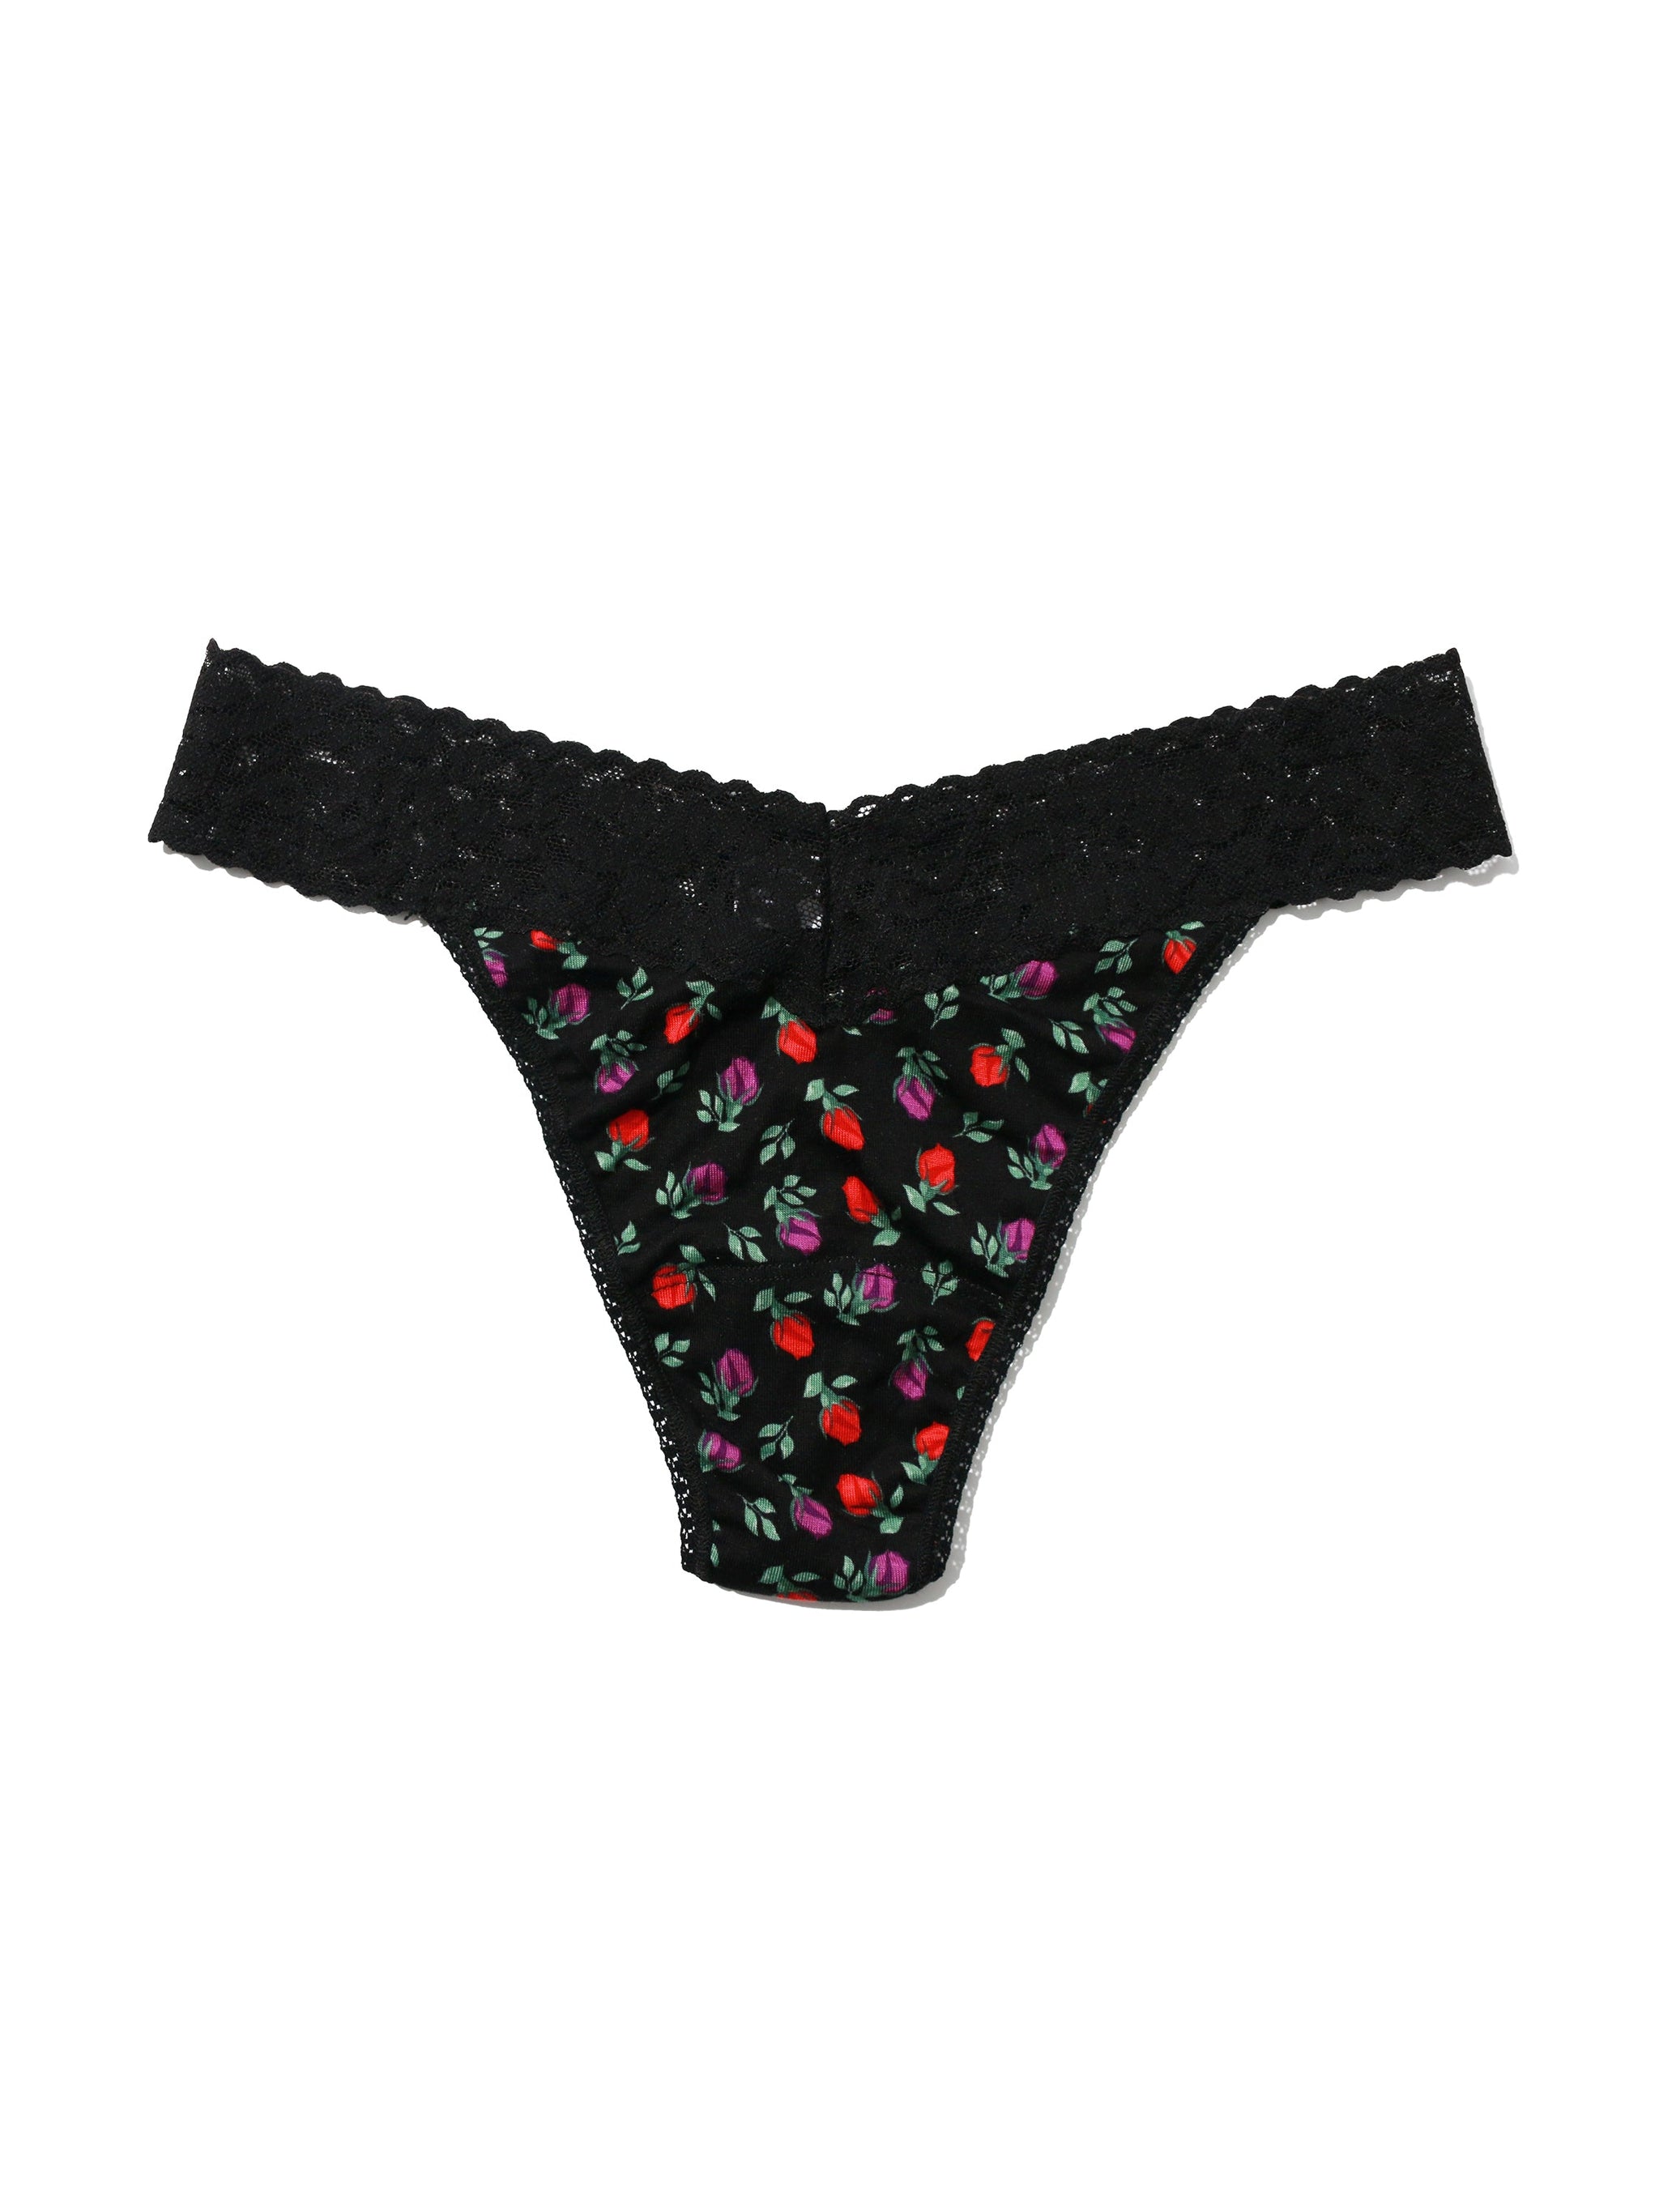 NEW Candies Thong G String Small Medium Large Lace polka dot floral black  red wh